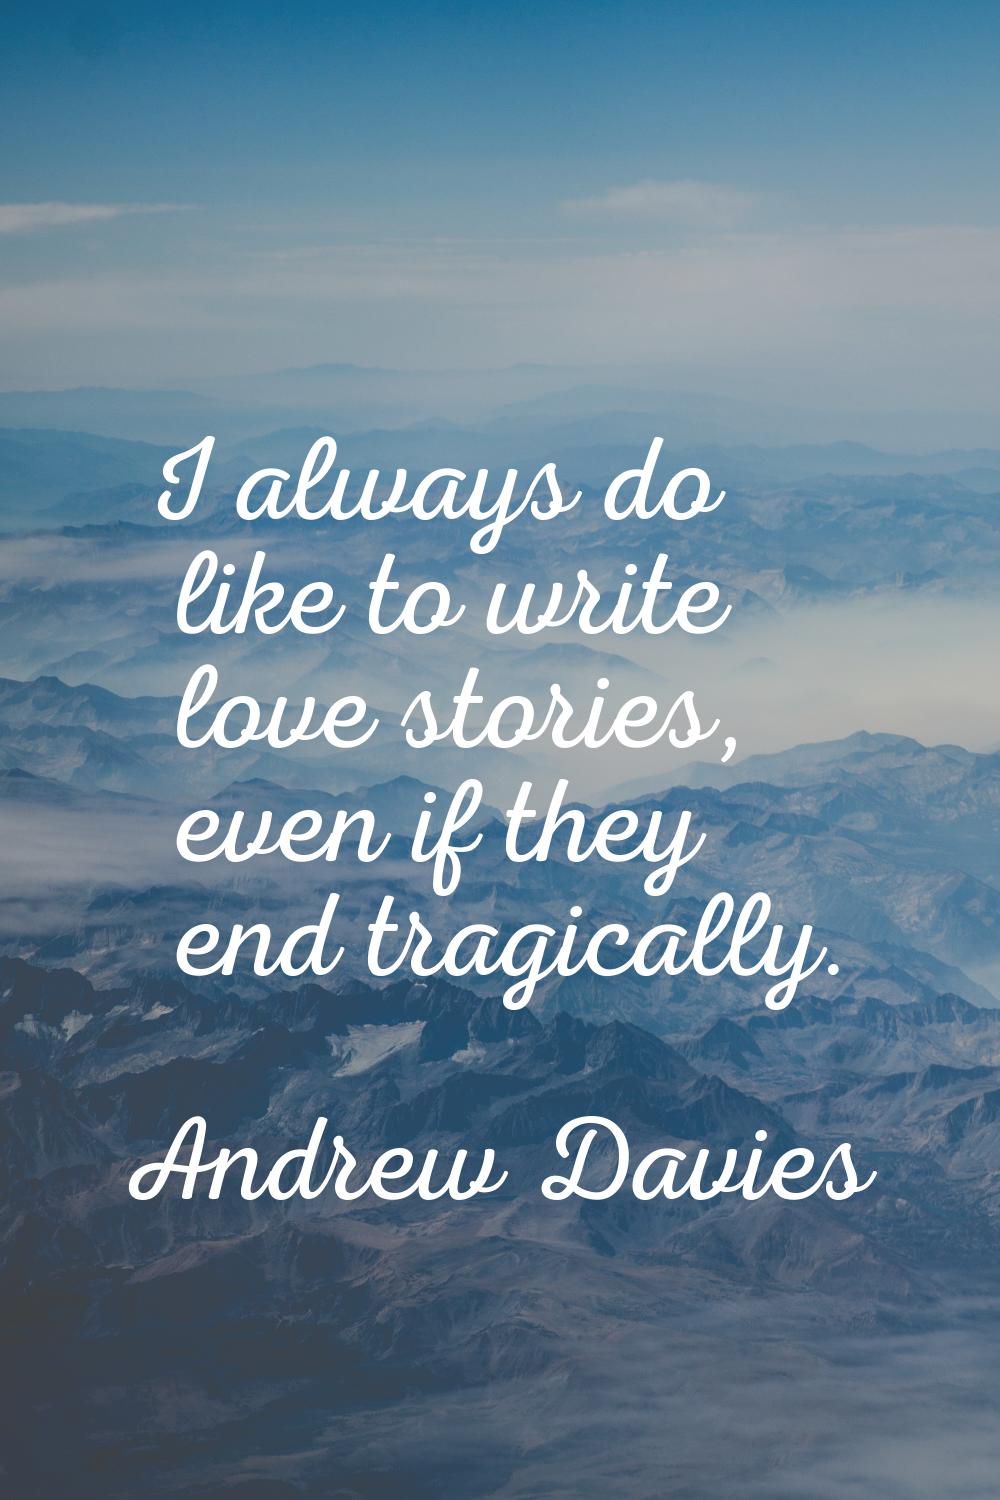 I always do like to write love stories, even if they end tragically.